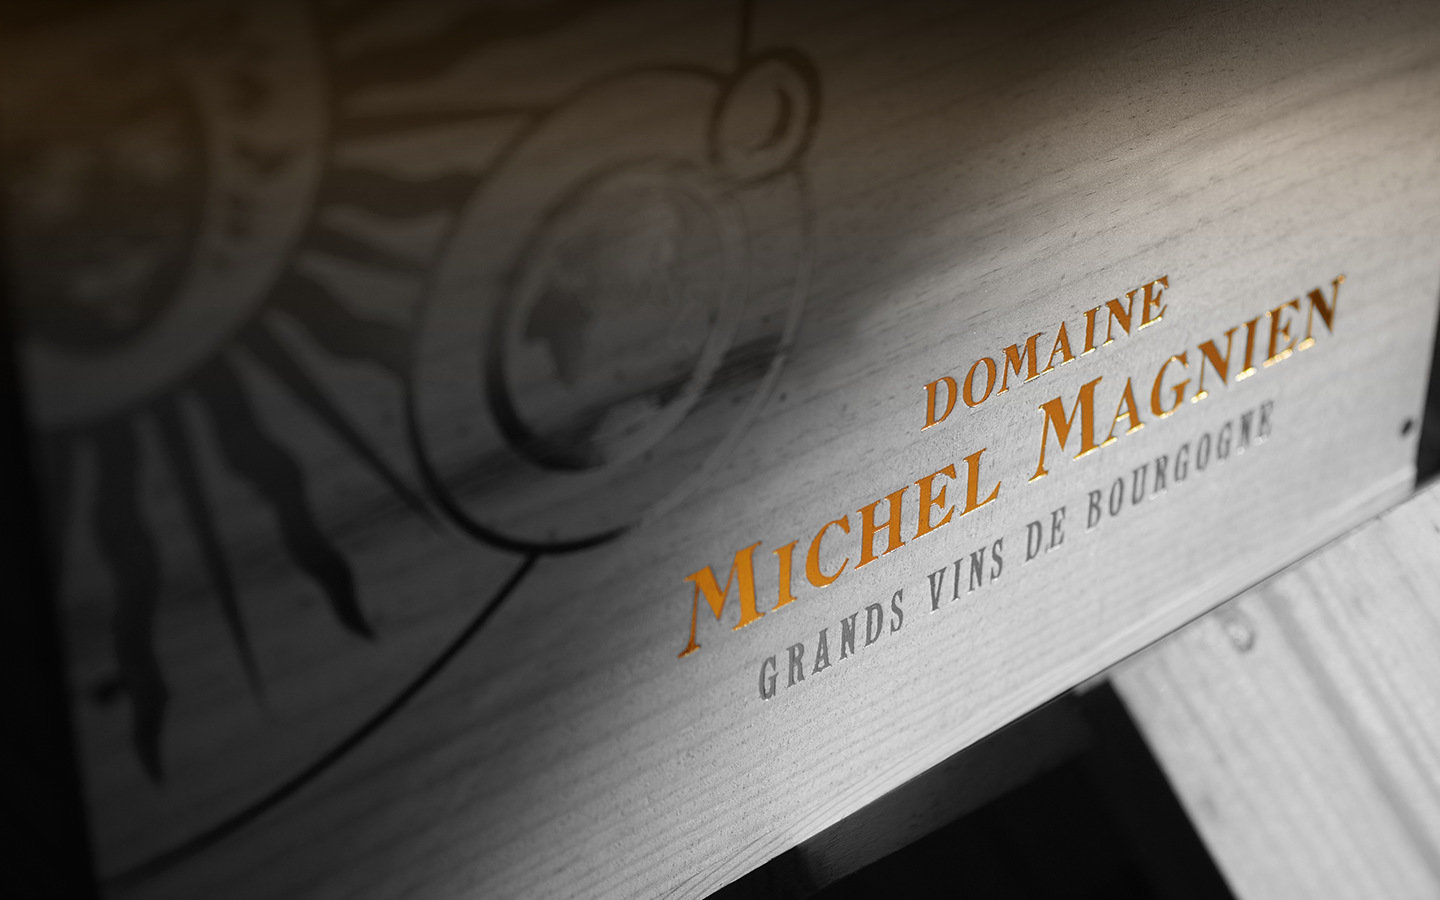 The wines of Domaine Michel Magnien